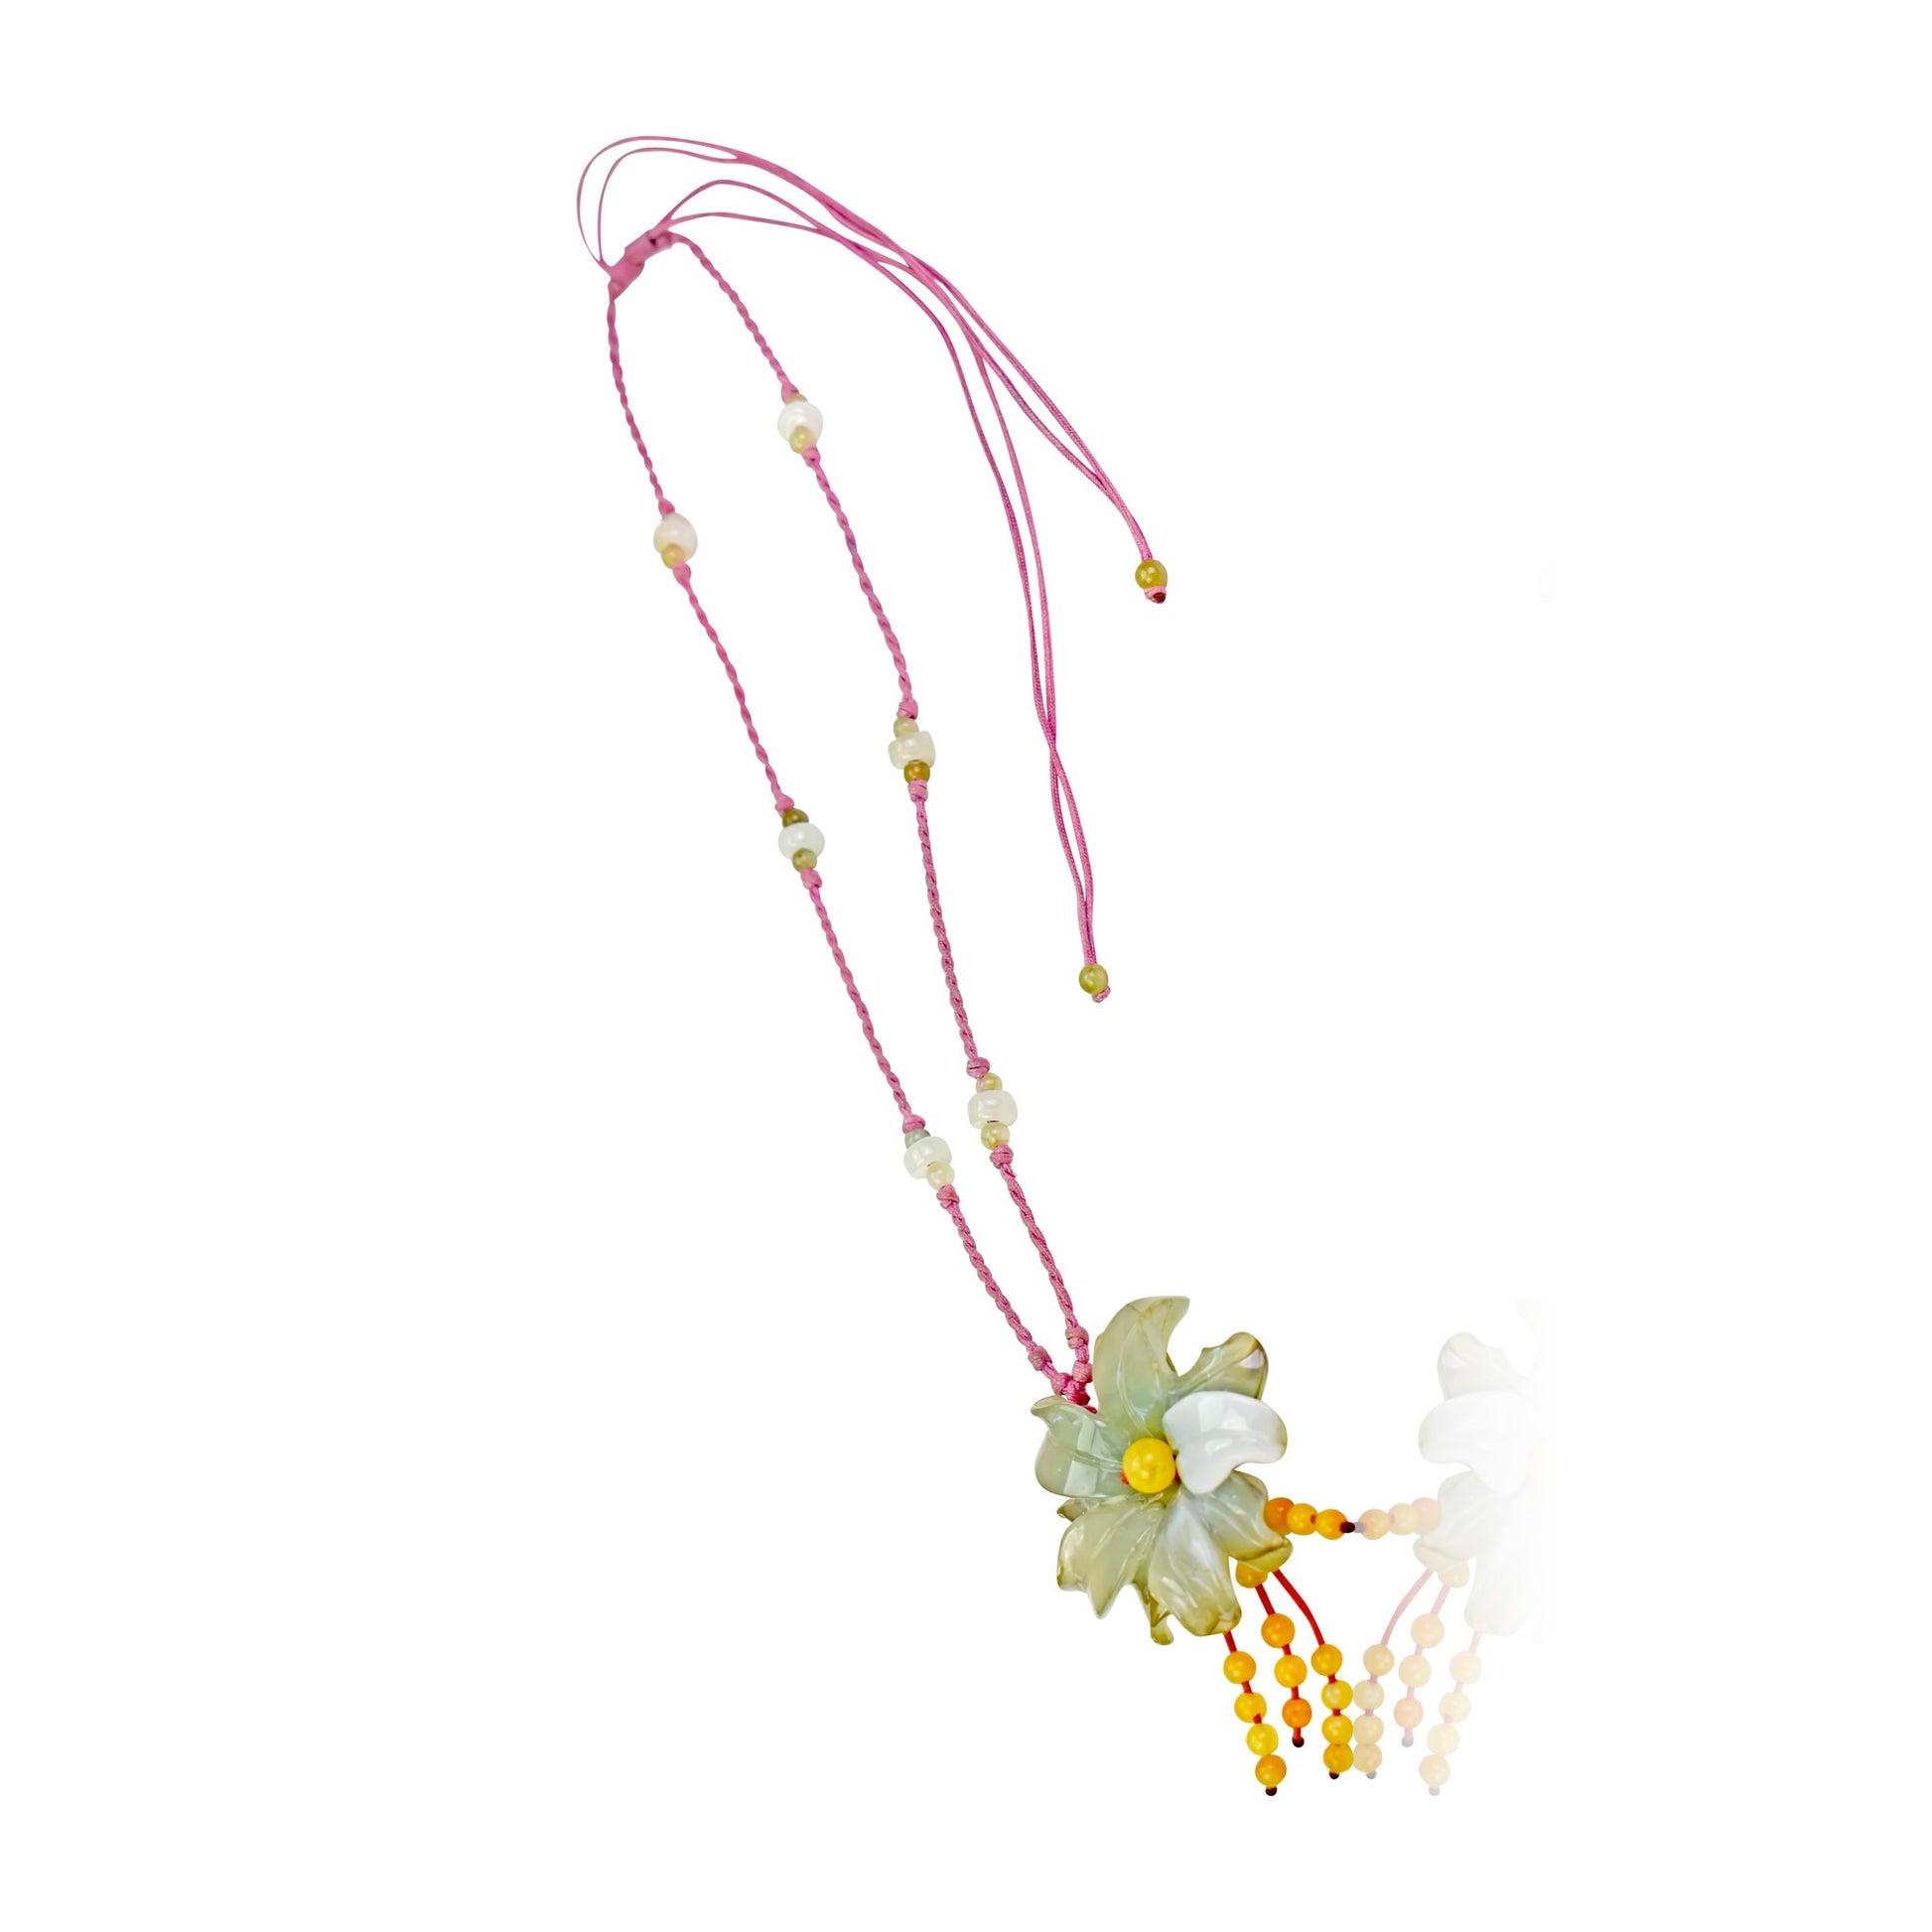 Get Lost in the Beauty of Anemone Flower Necklace